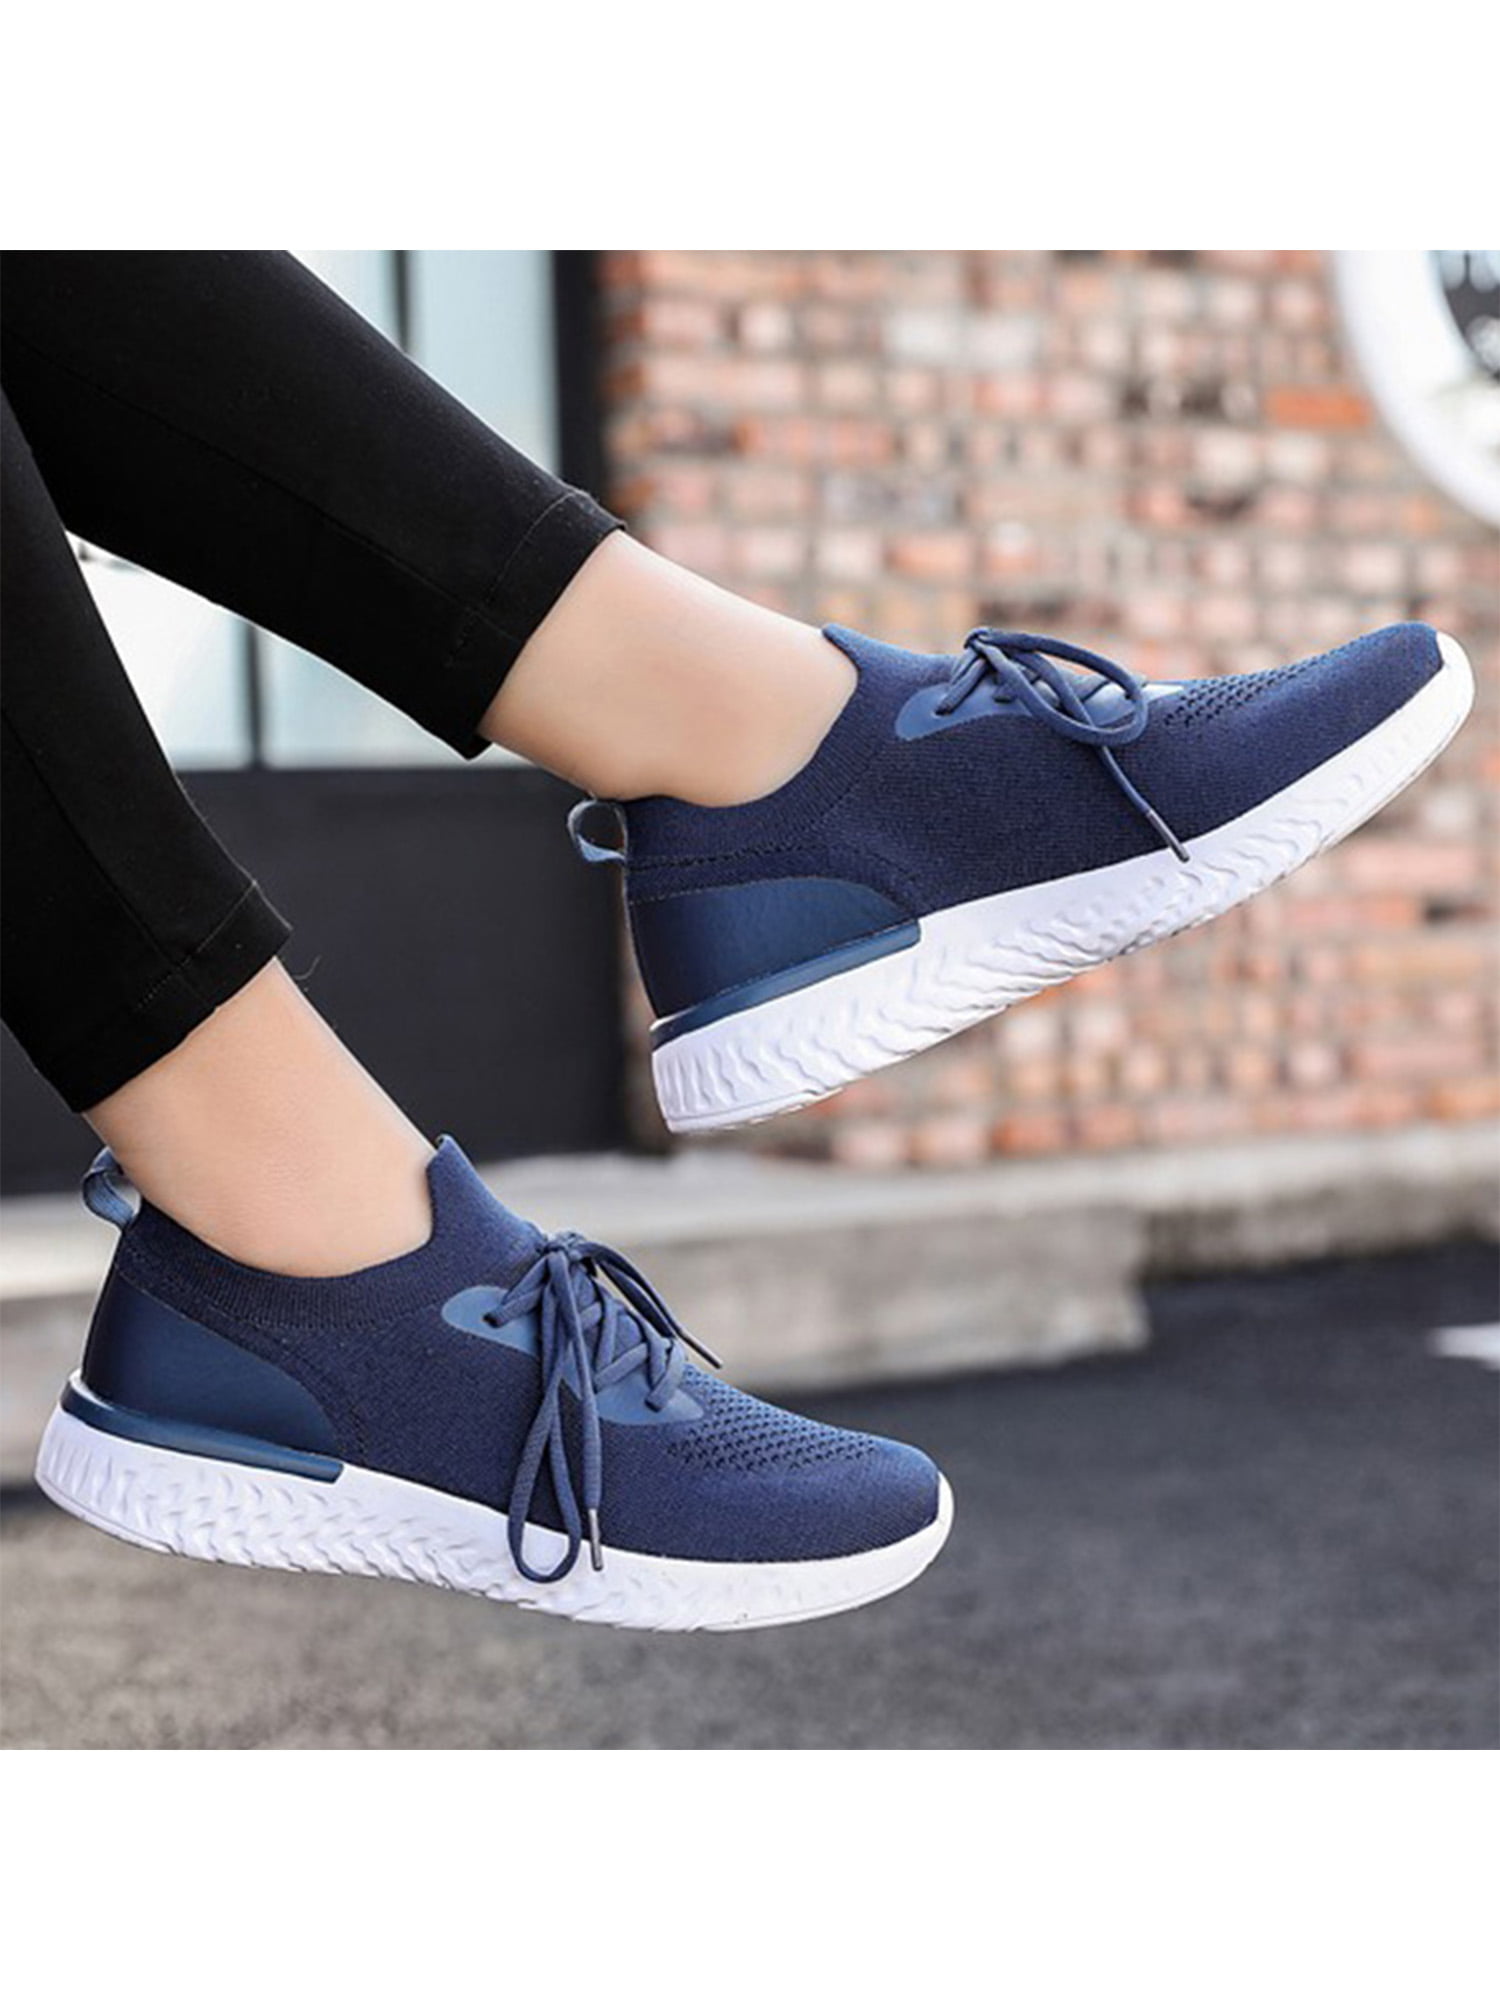 Men's Casual Running Shoes Walking Athletic Sports Jogging Tennis Gym Sneakers